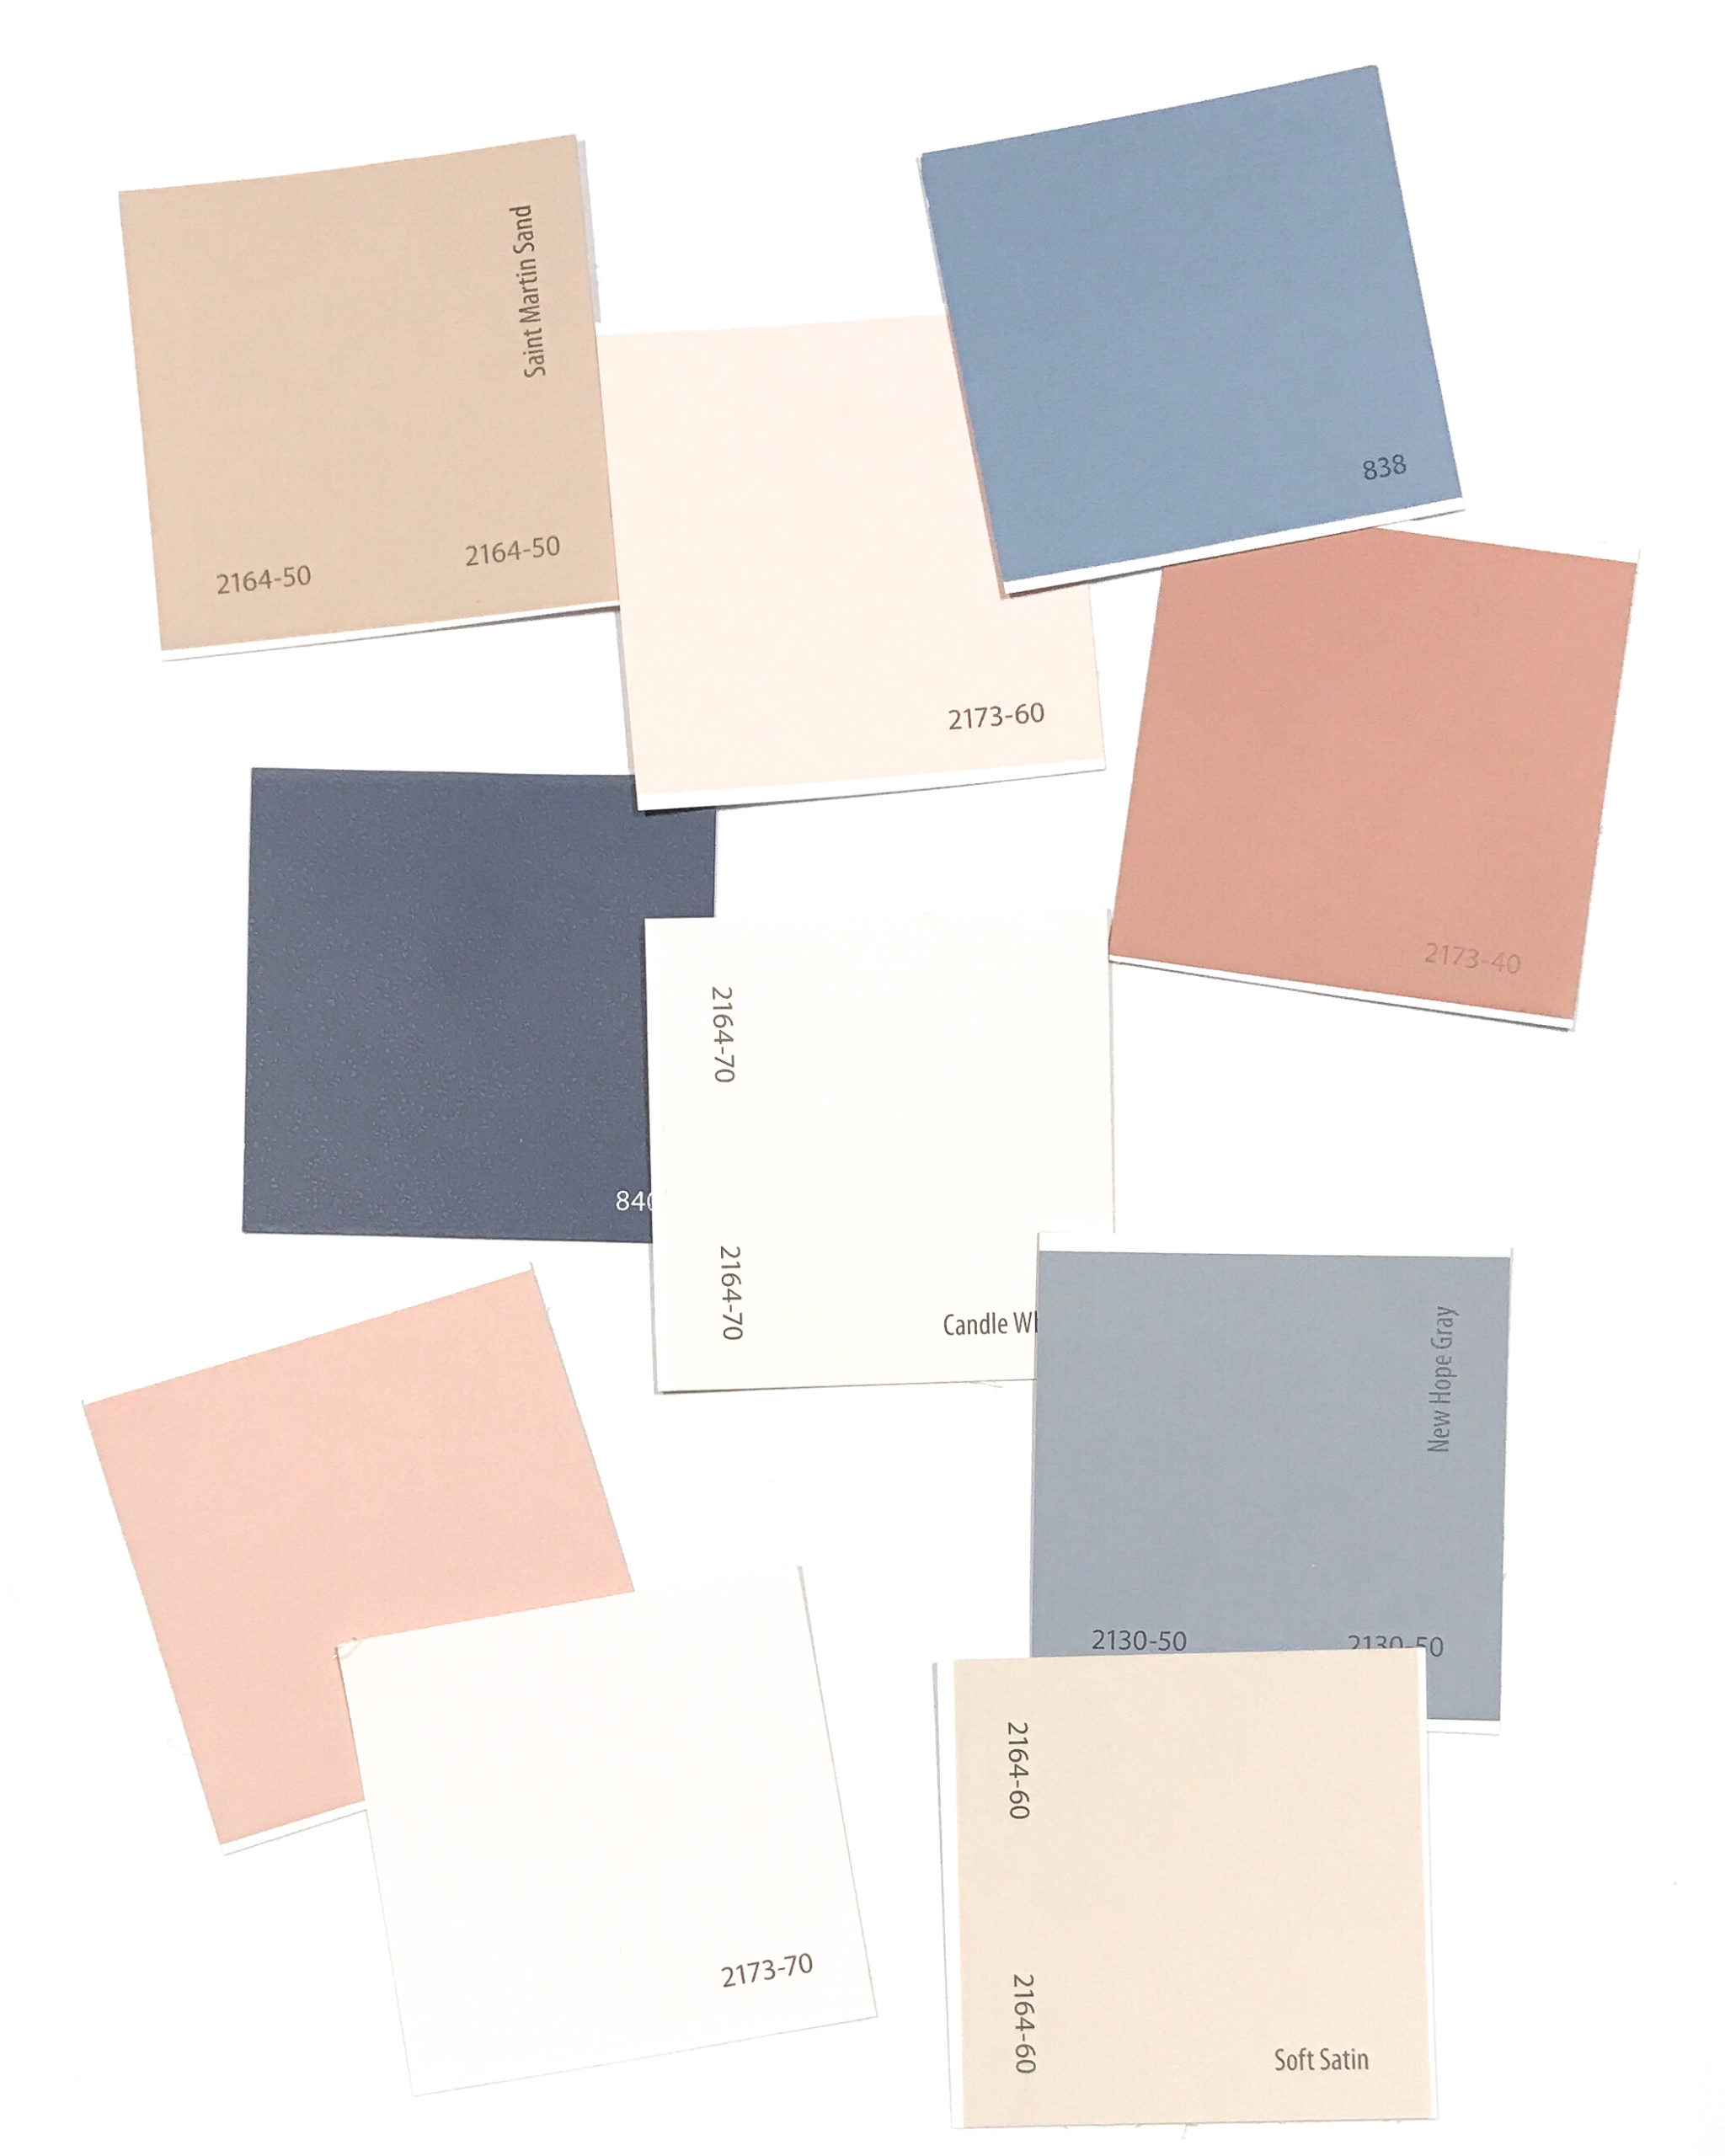 10 great colors for your next photo shoot. This shows many color samples, showing lots of shades of peach, blue, white, beige, rust, that look great in photos.